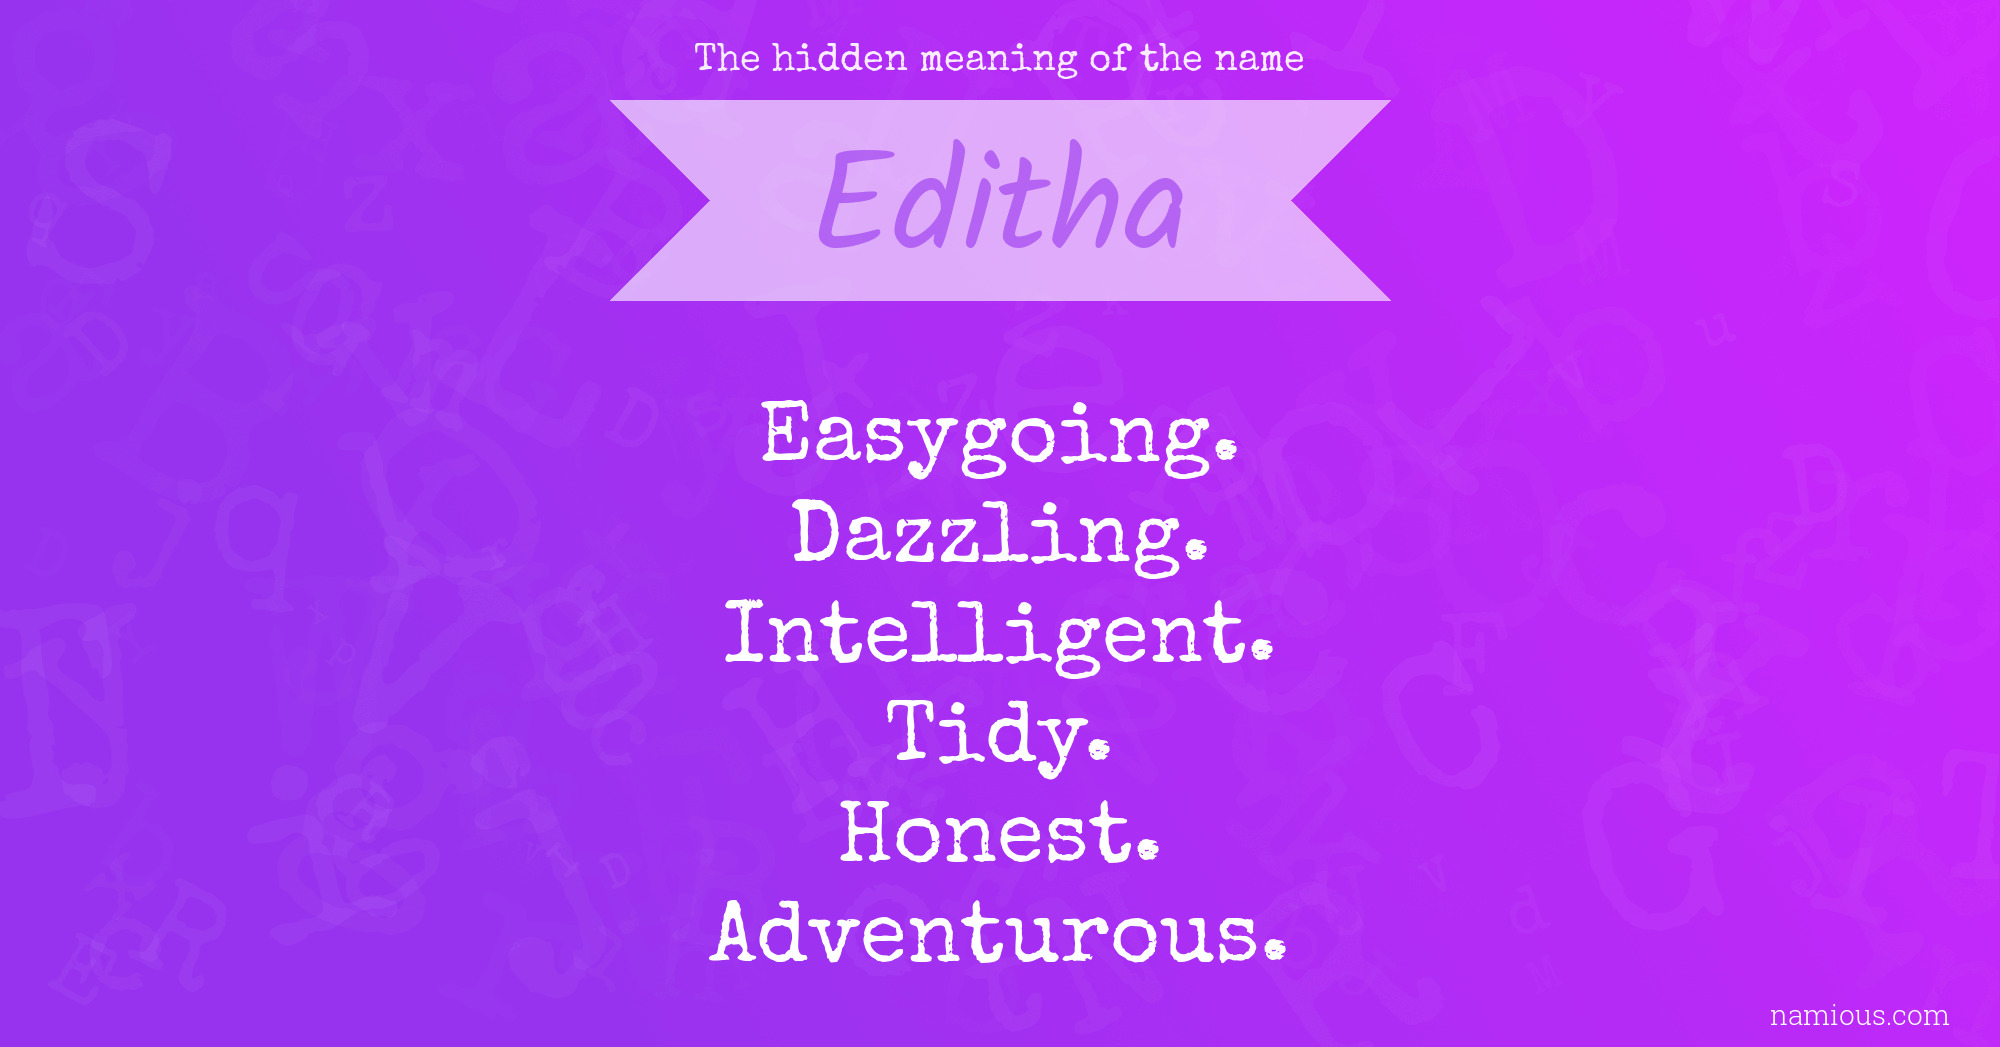 The hidden meaning of the name Editha